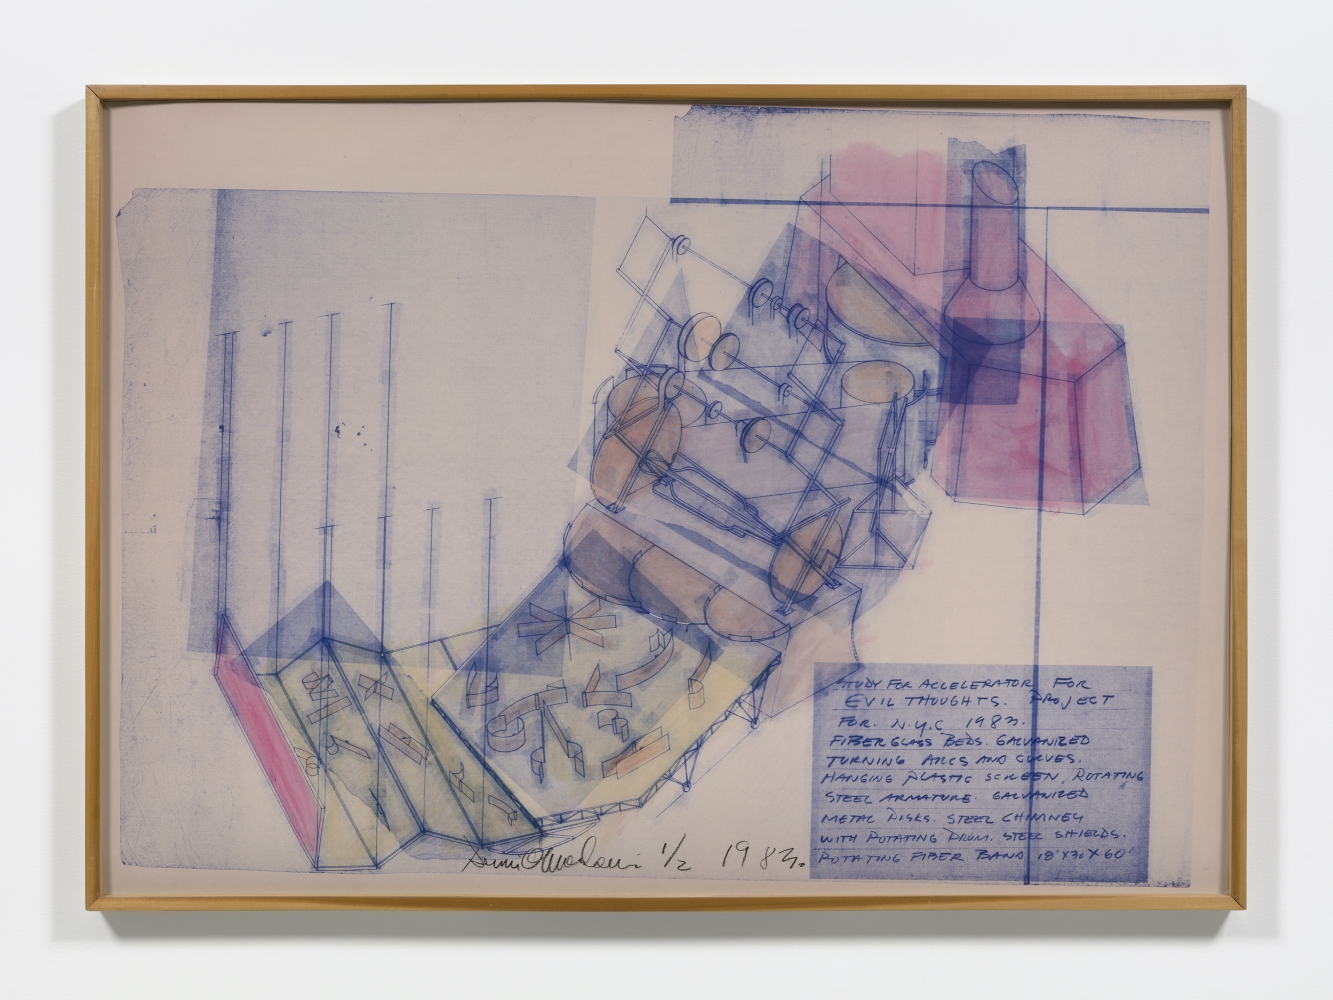 Blue and red hand tinted line print on linen depicting rotating sculpture by Dennis Oppenheim.